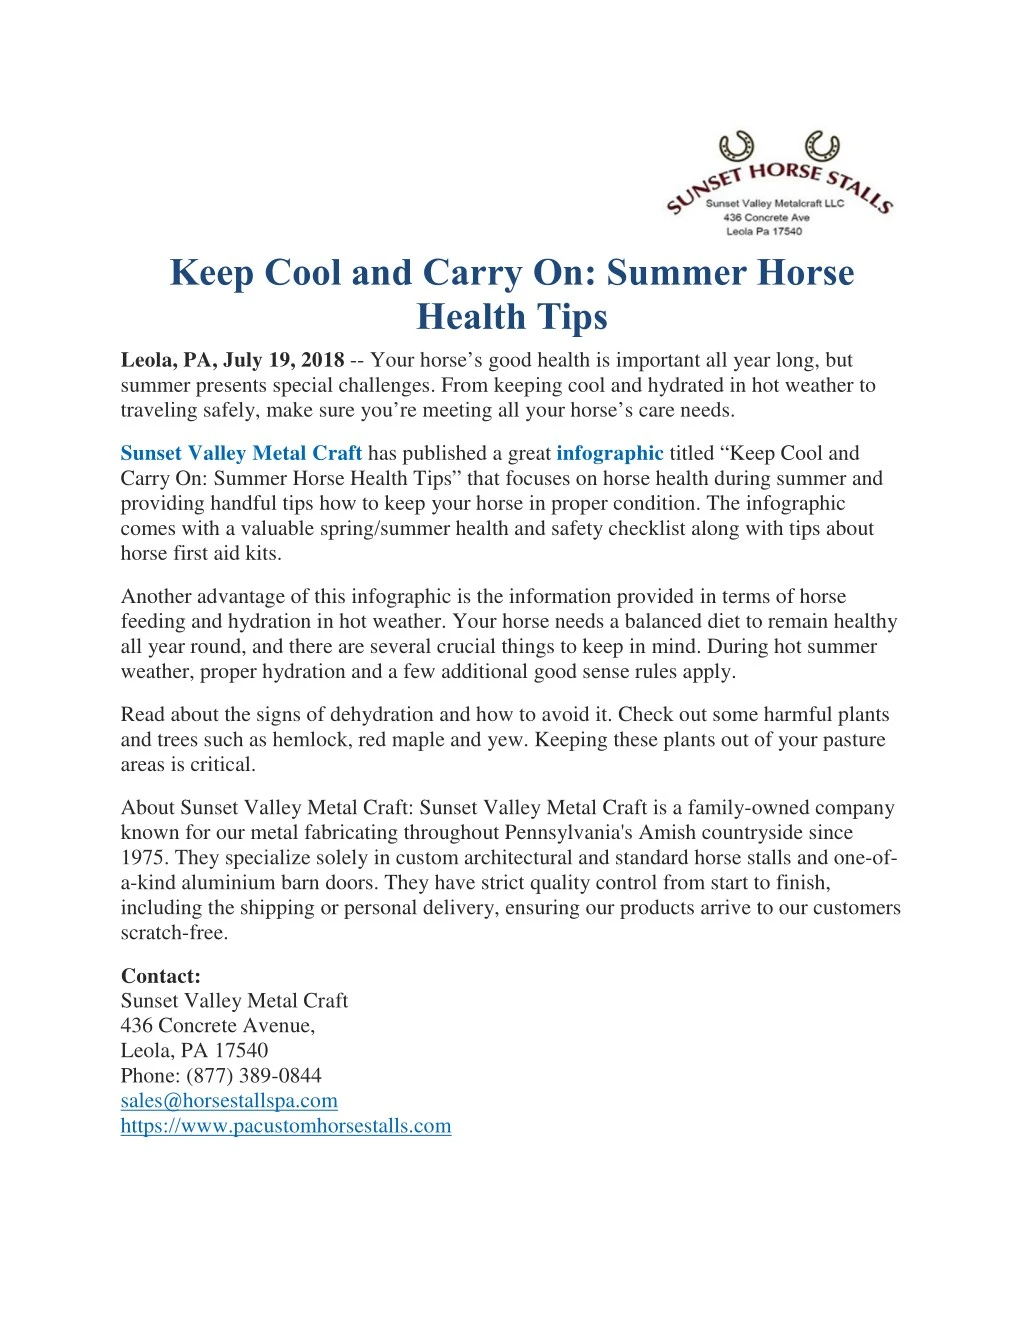 keep cool and carry on summer horse health tips